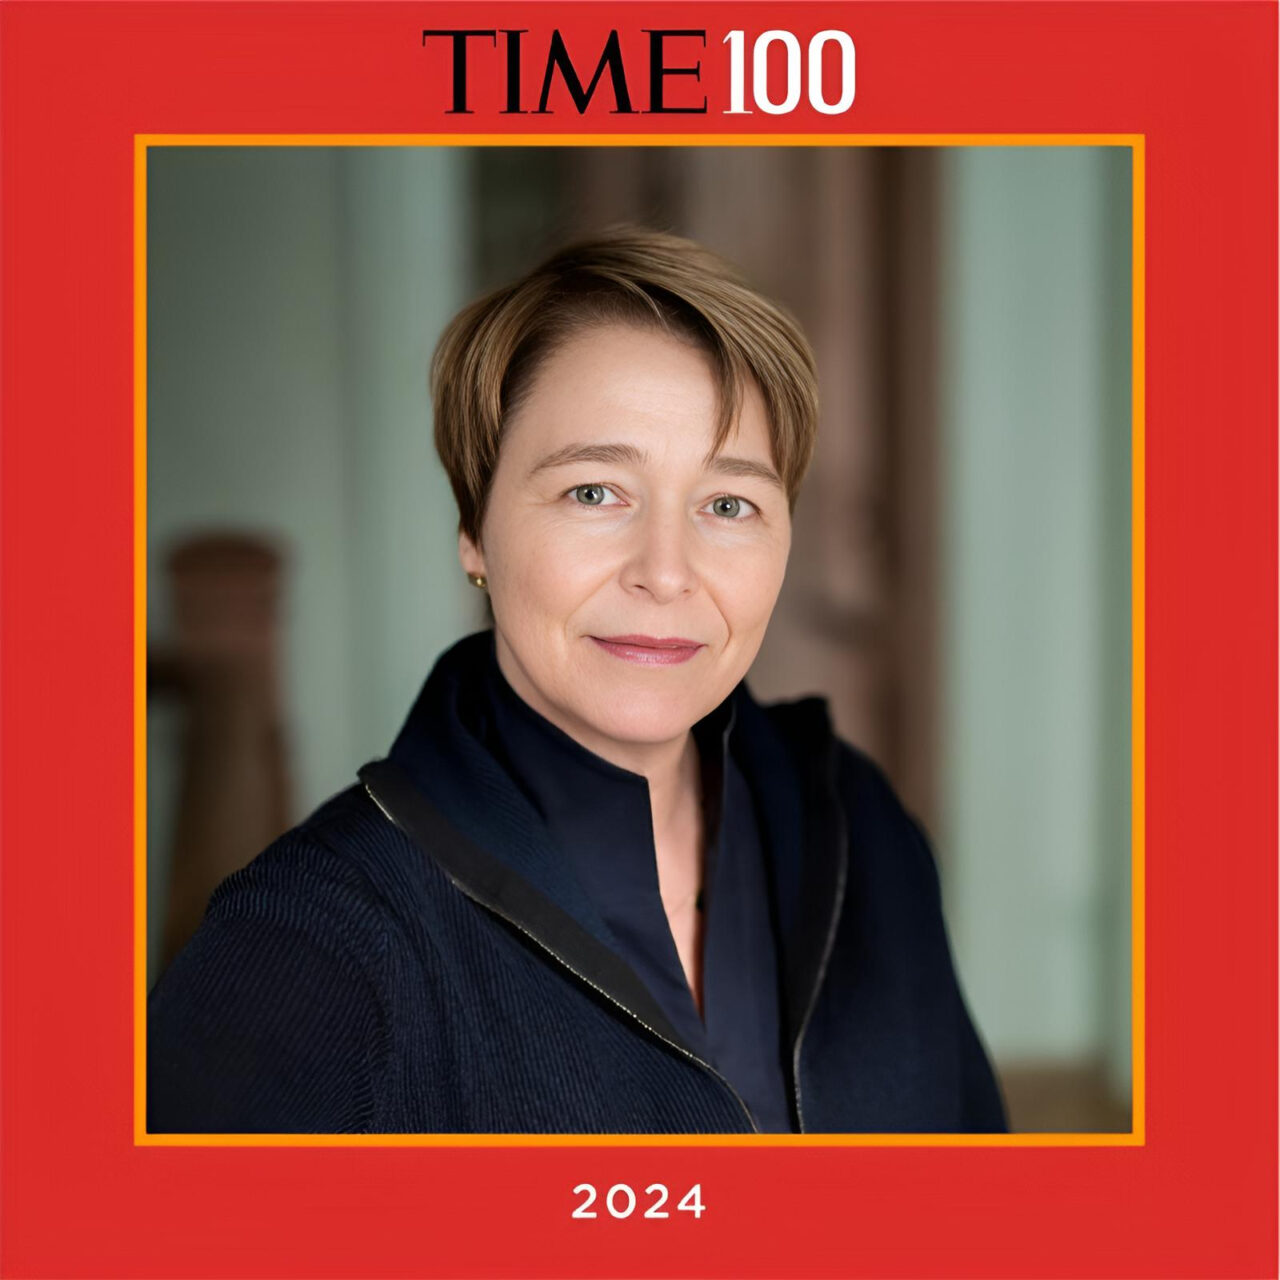 Partners In Health Co-founder, Ophelia Dahl has been named one of the world’s 100 most influential people in 2024 as part of the annual TIME100